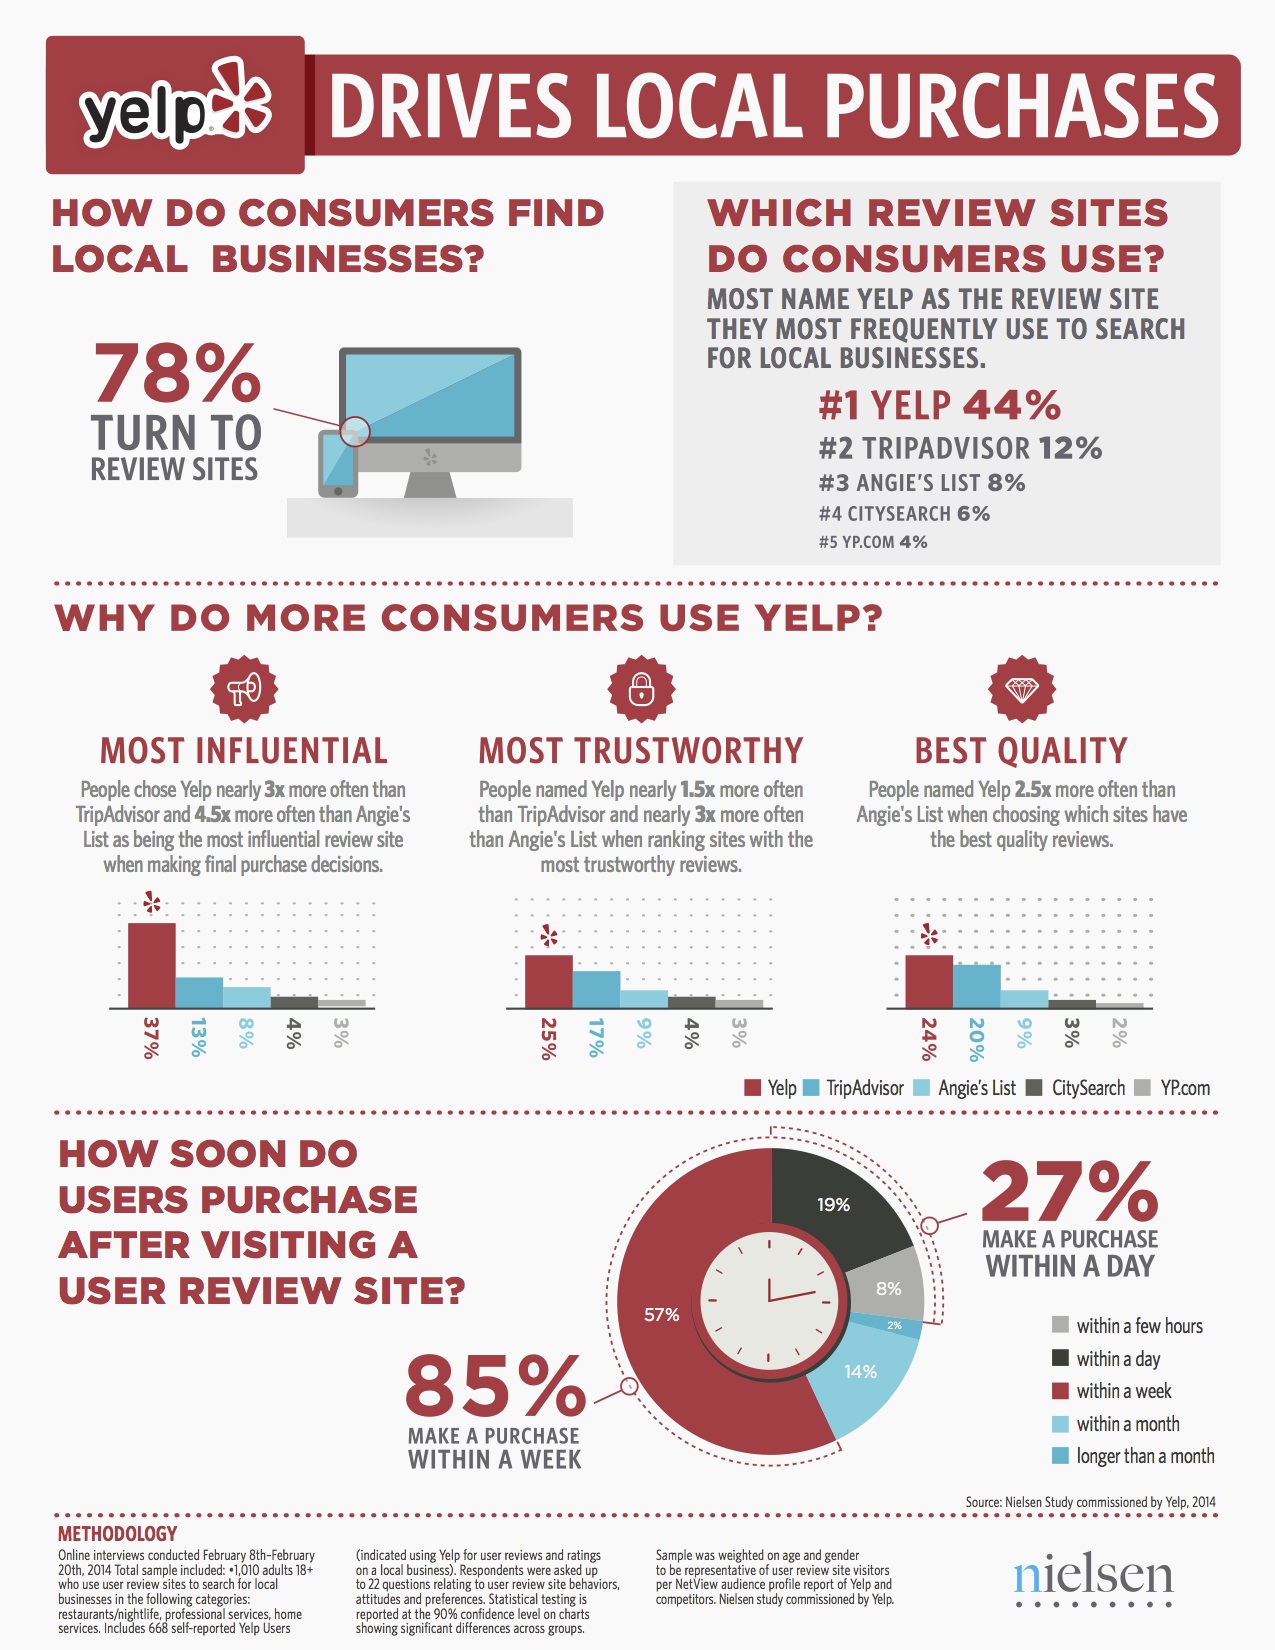 78% of consumers use review sites to identify local businesses.